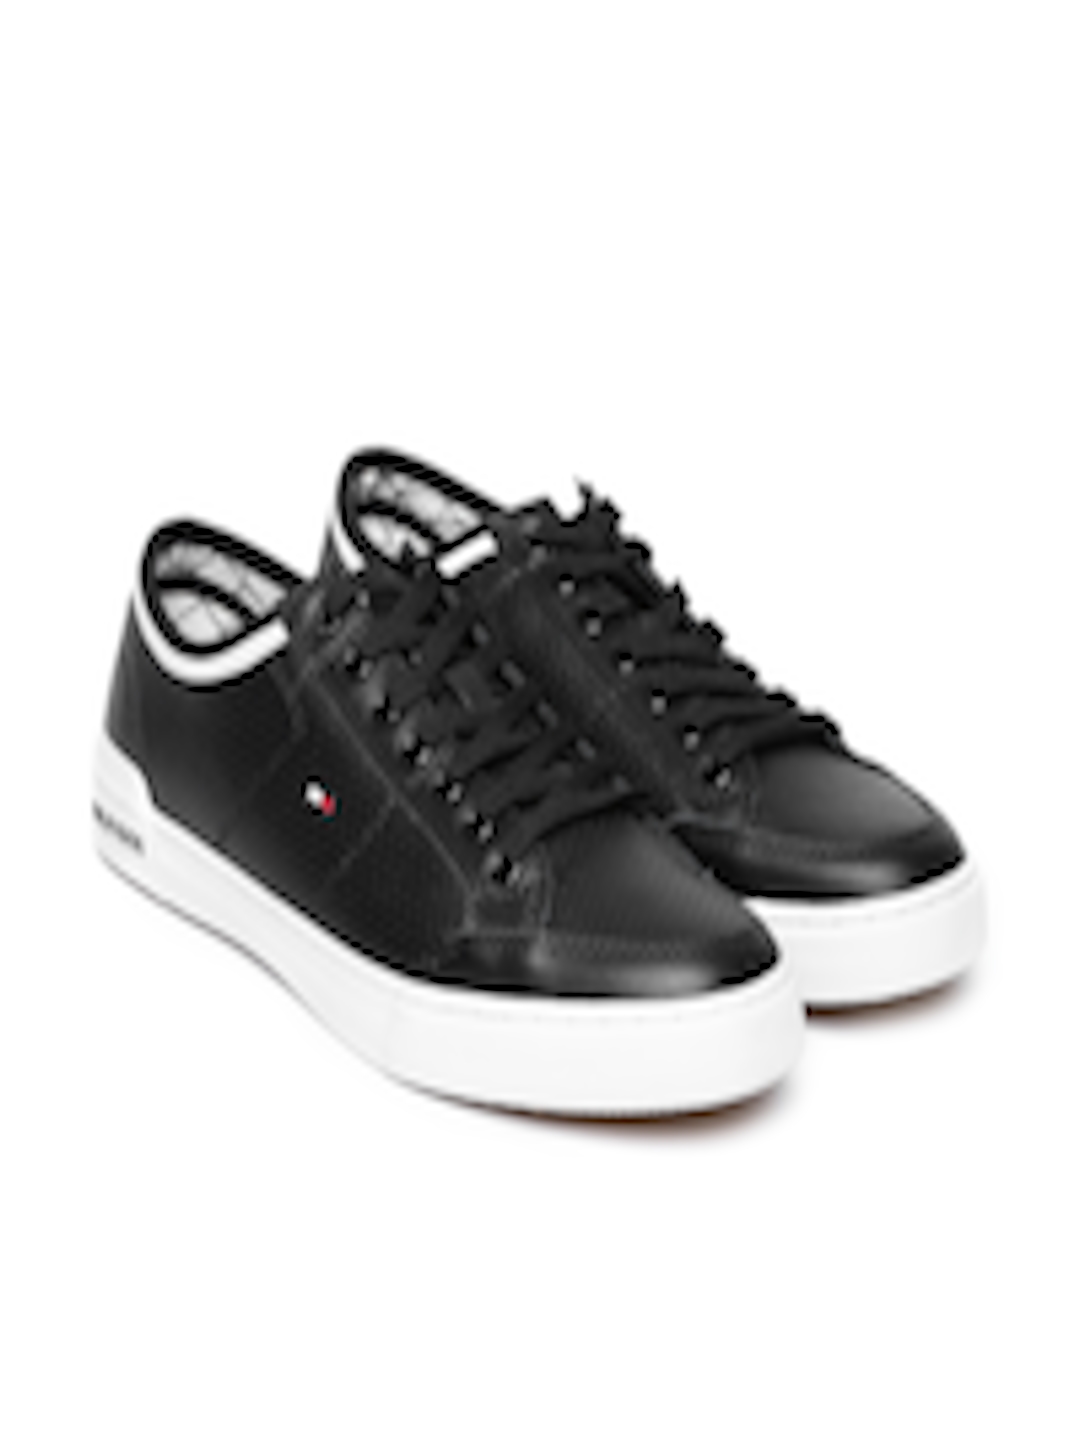 Buy Tommy Hilfiger Men Black Perforated Leather Sneakers - Casual Shoes